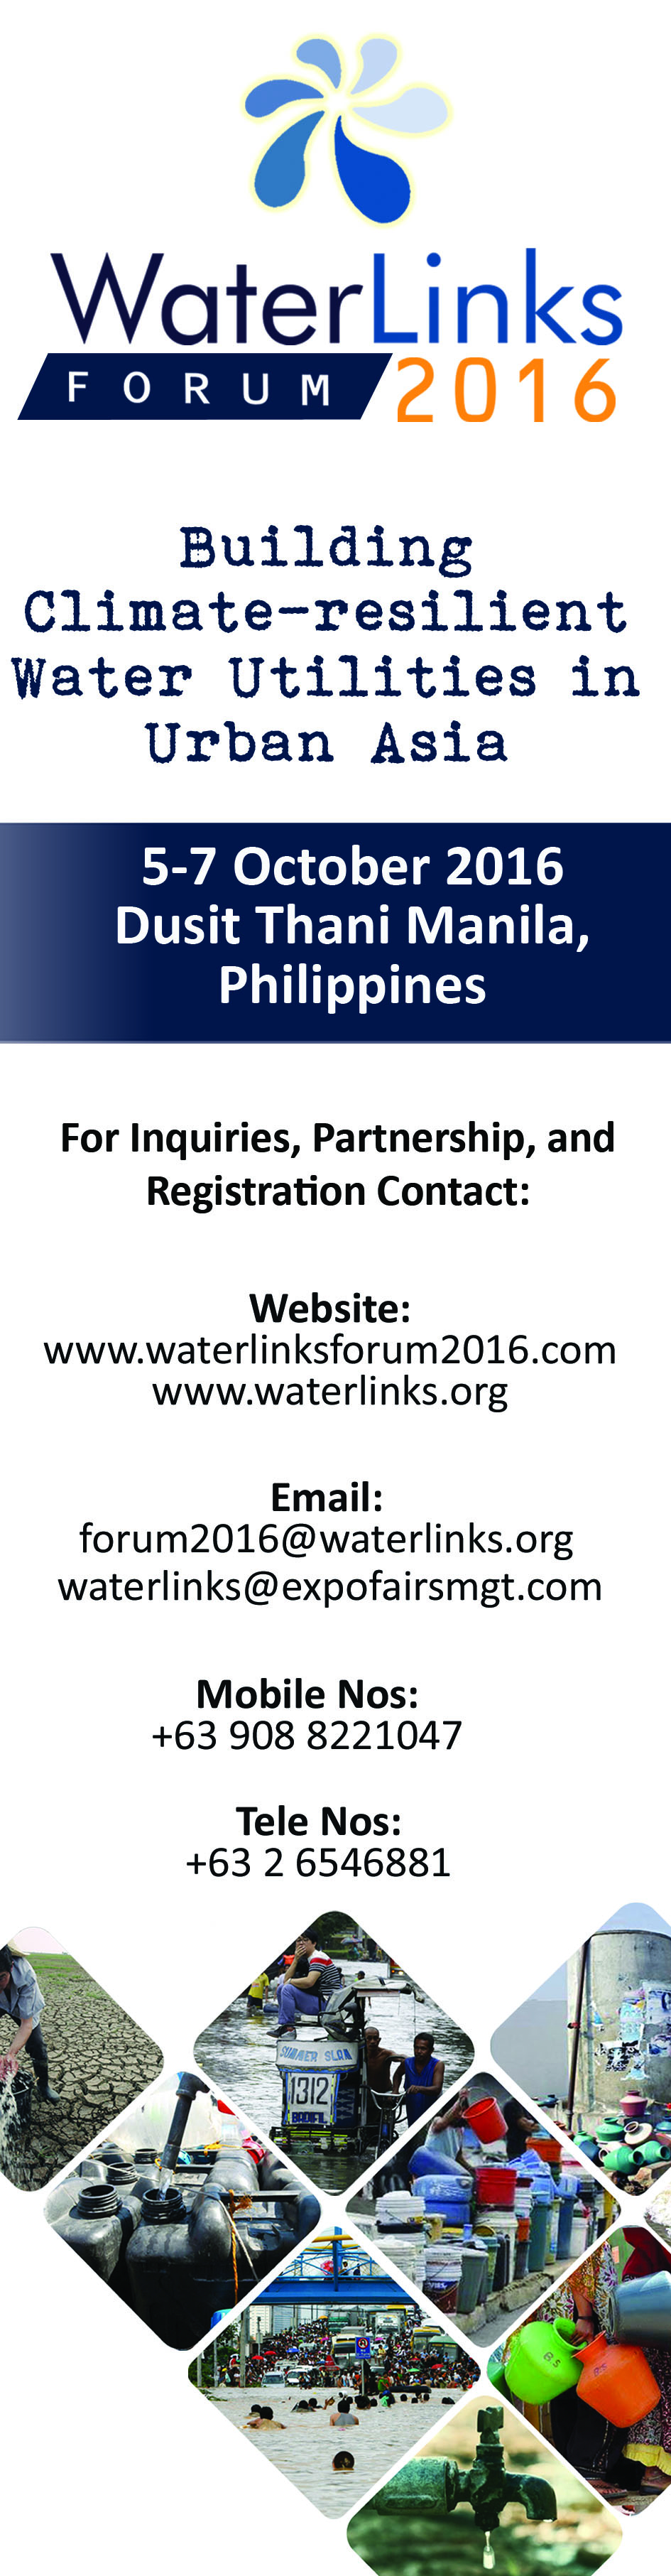 THE WATERLINKS FORUM 2016 - Manila, Philippines / 5-7 October 2016 Asia&rsquo;s water utilities are operating in complex and demanding urban env...